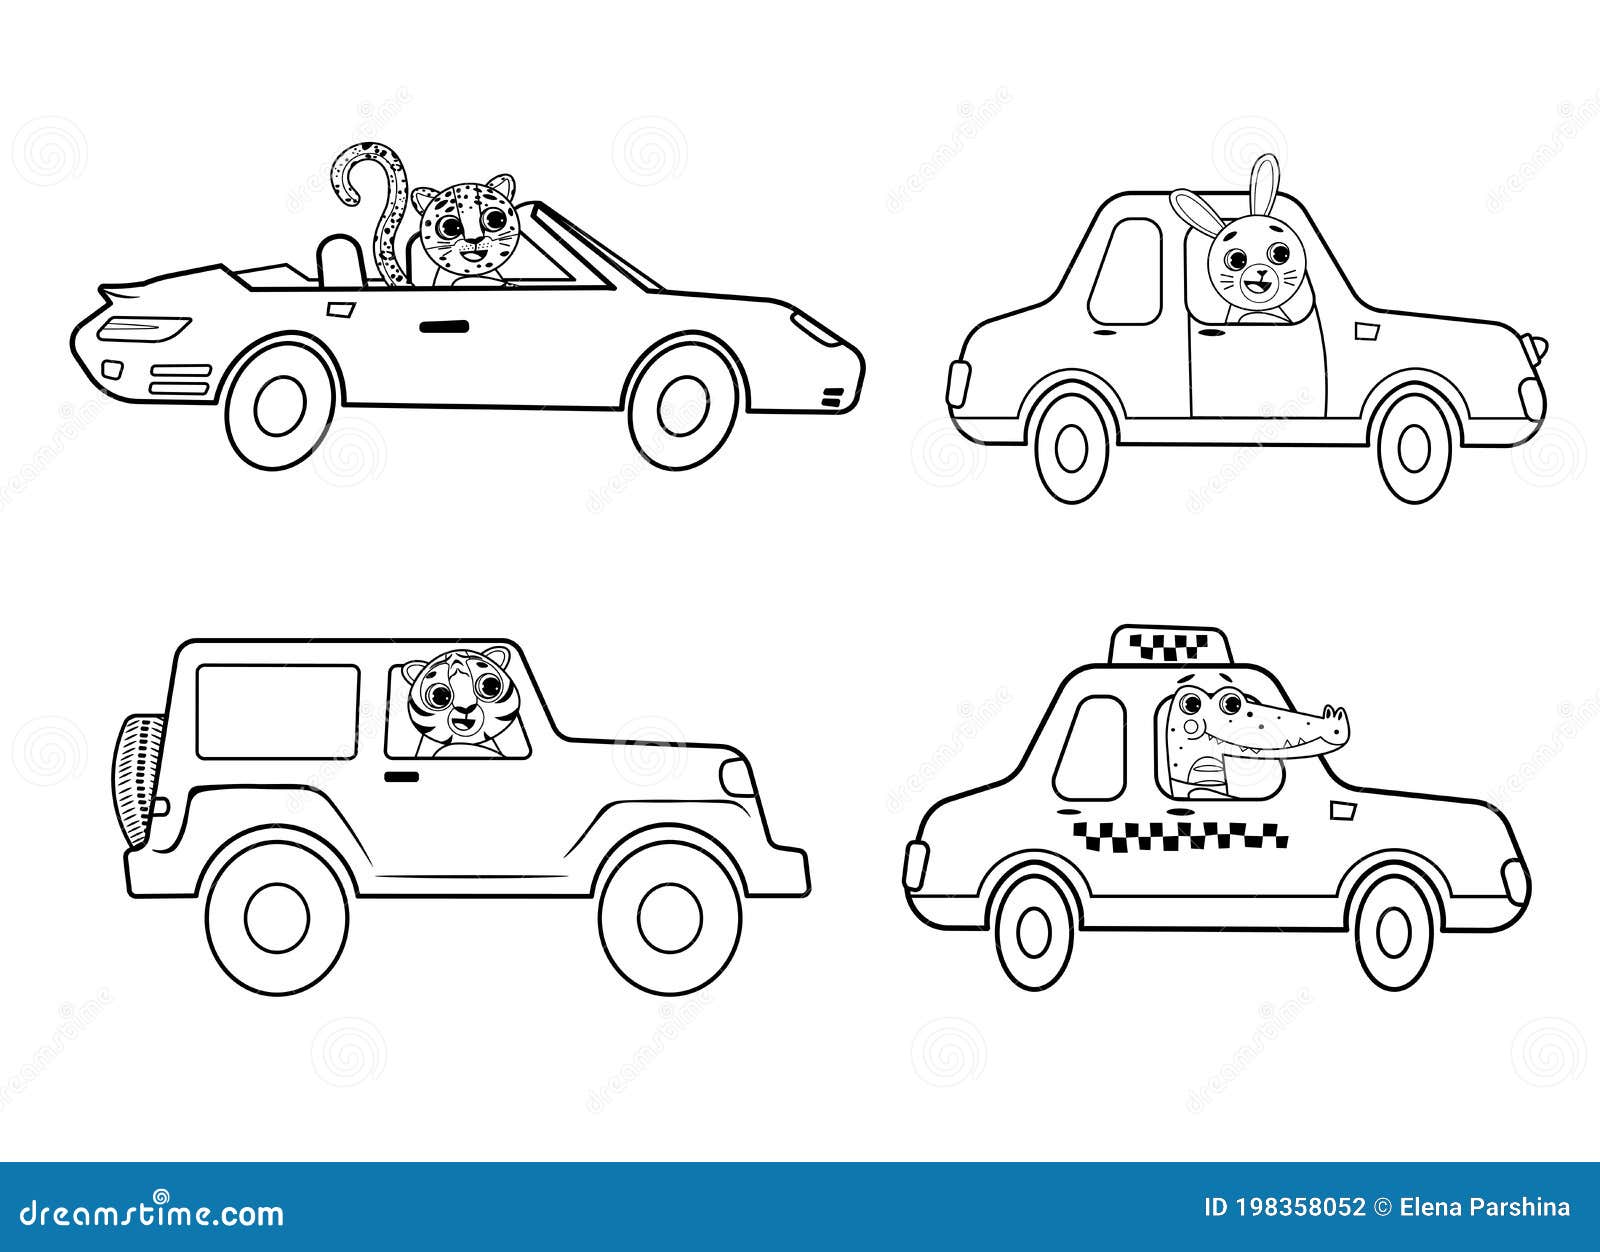 funny-coloring-kids-transport-set-with-animals-cars-and-vehicles